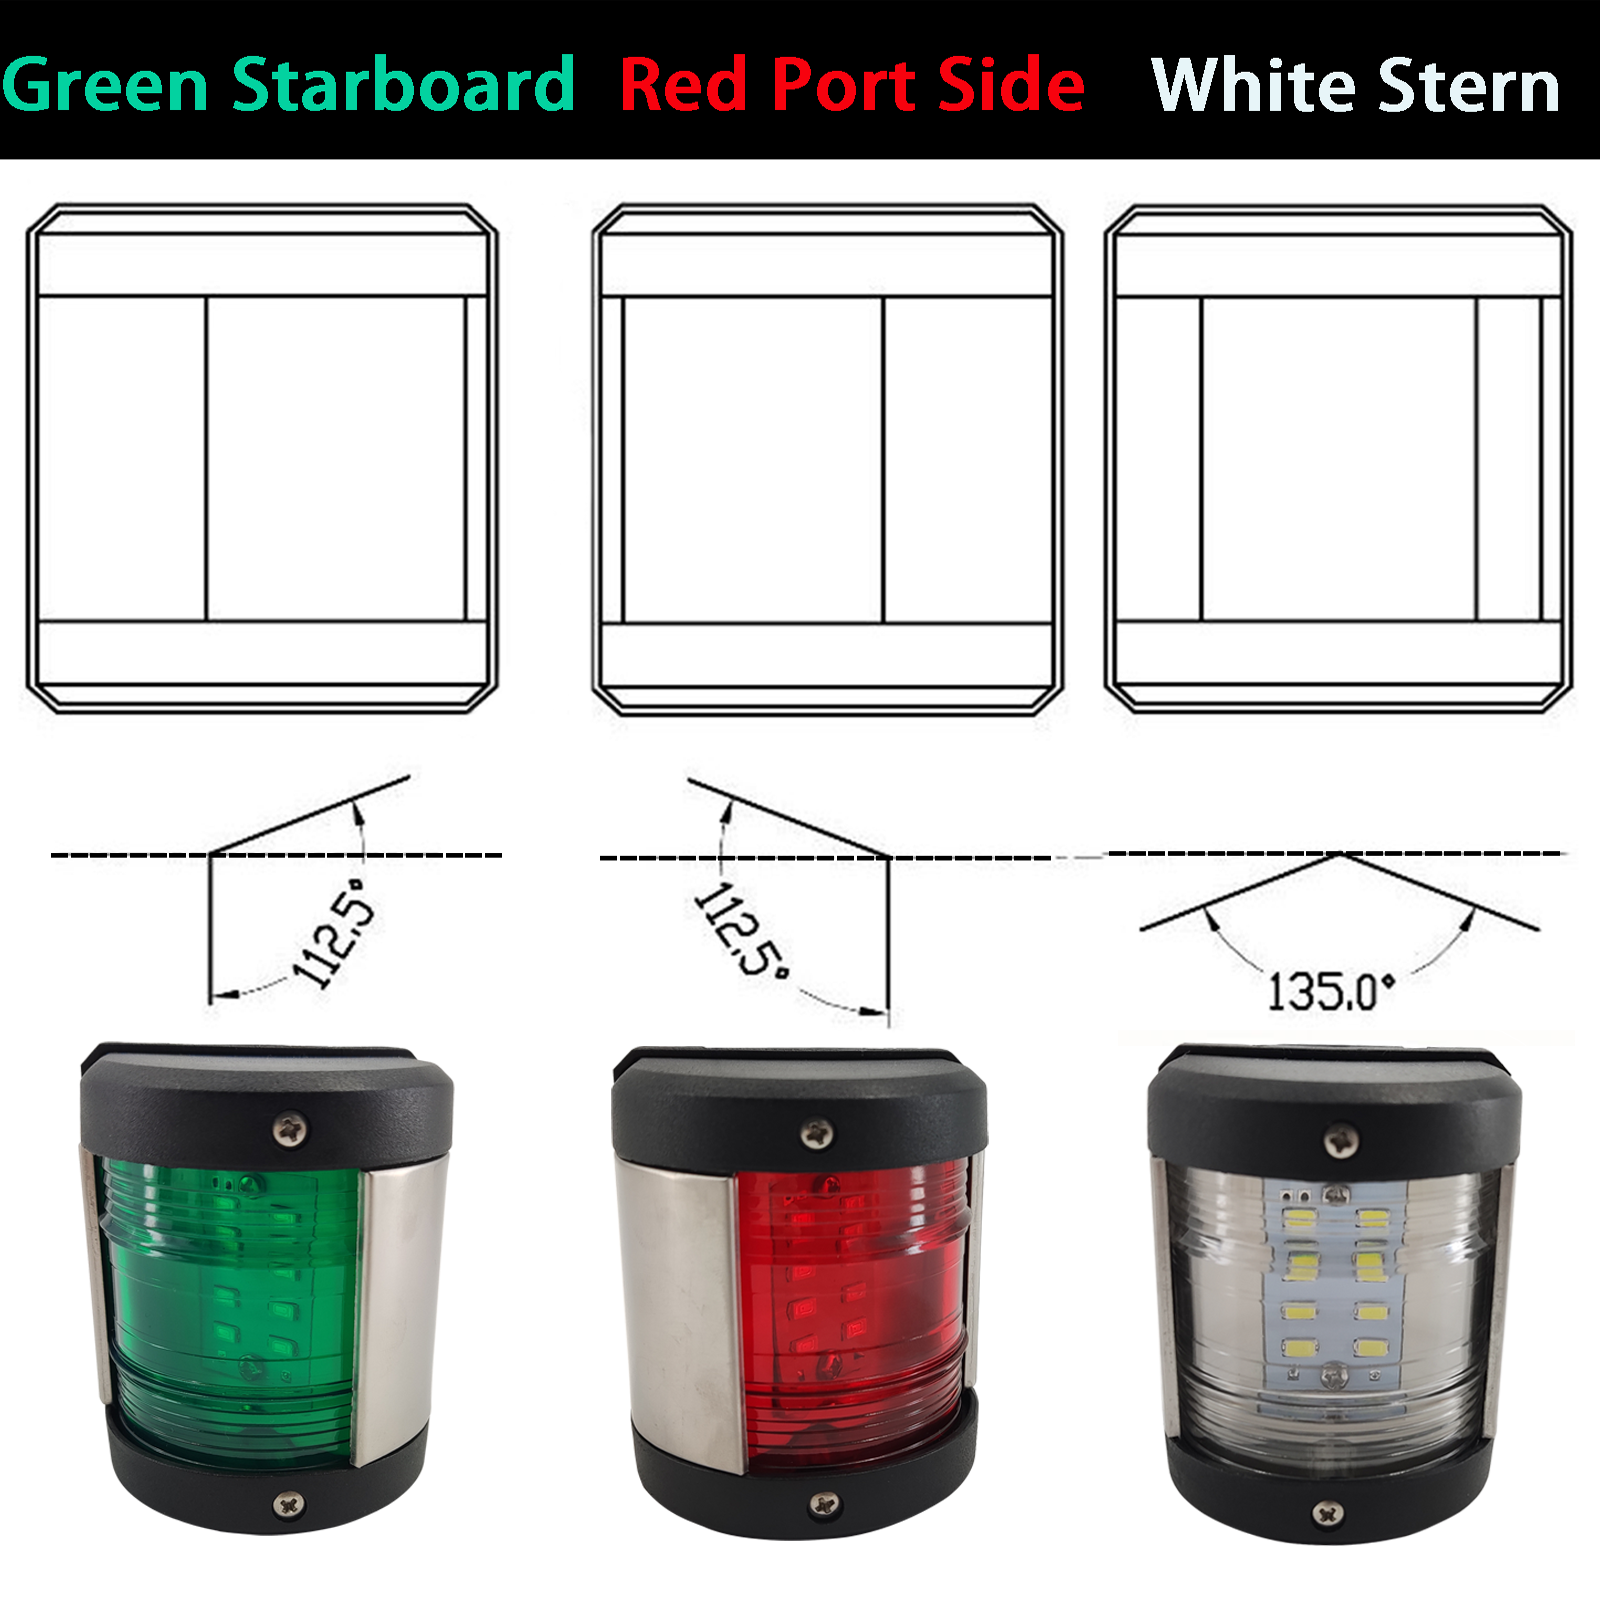 Green Starboard,Red Port Side,White Stern